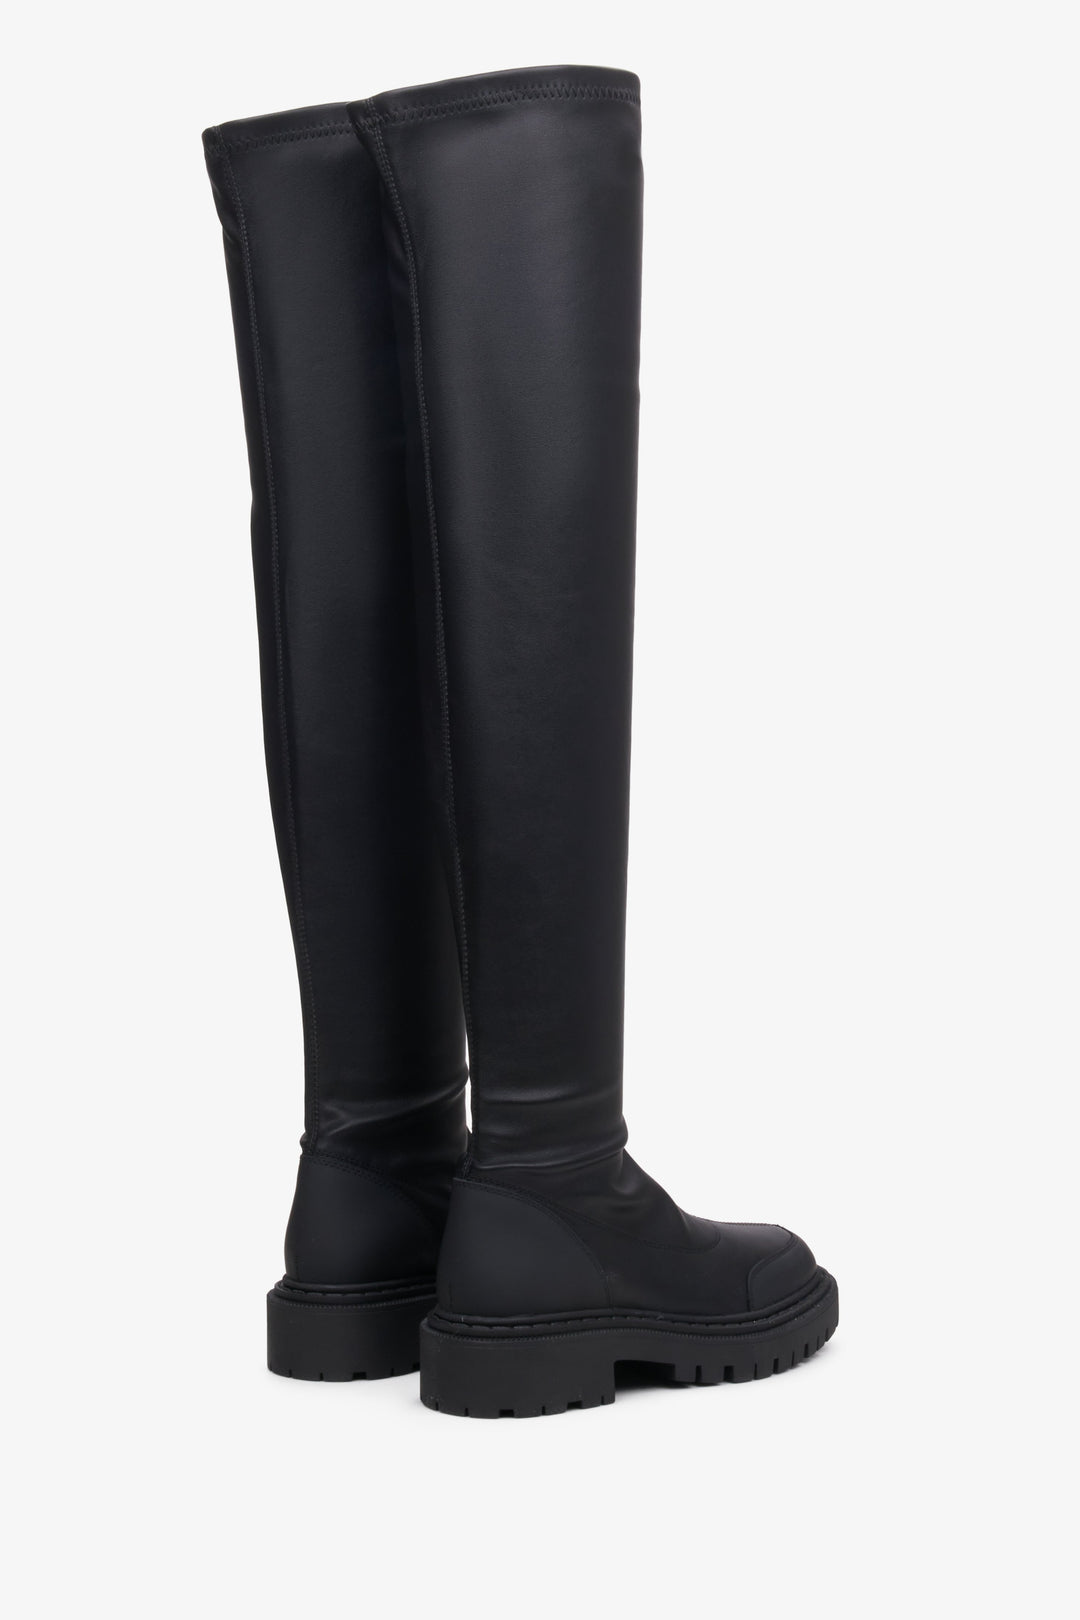 Estro black leather high women's boots with elastic shaft - close-up of the back and side line of the boots.